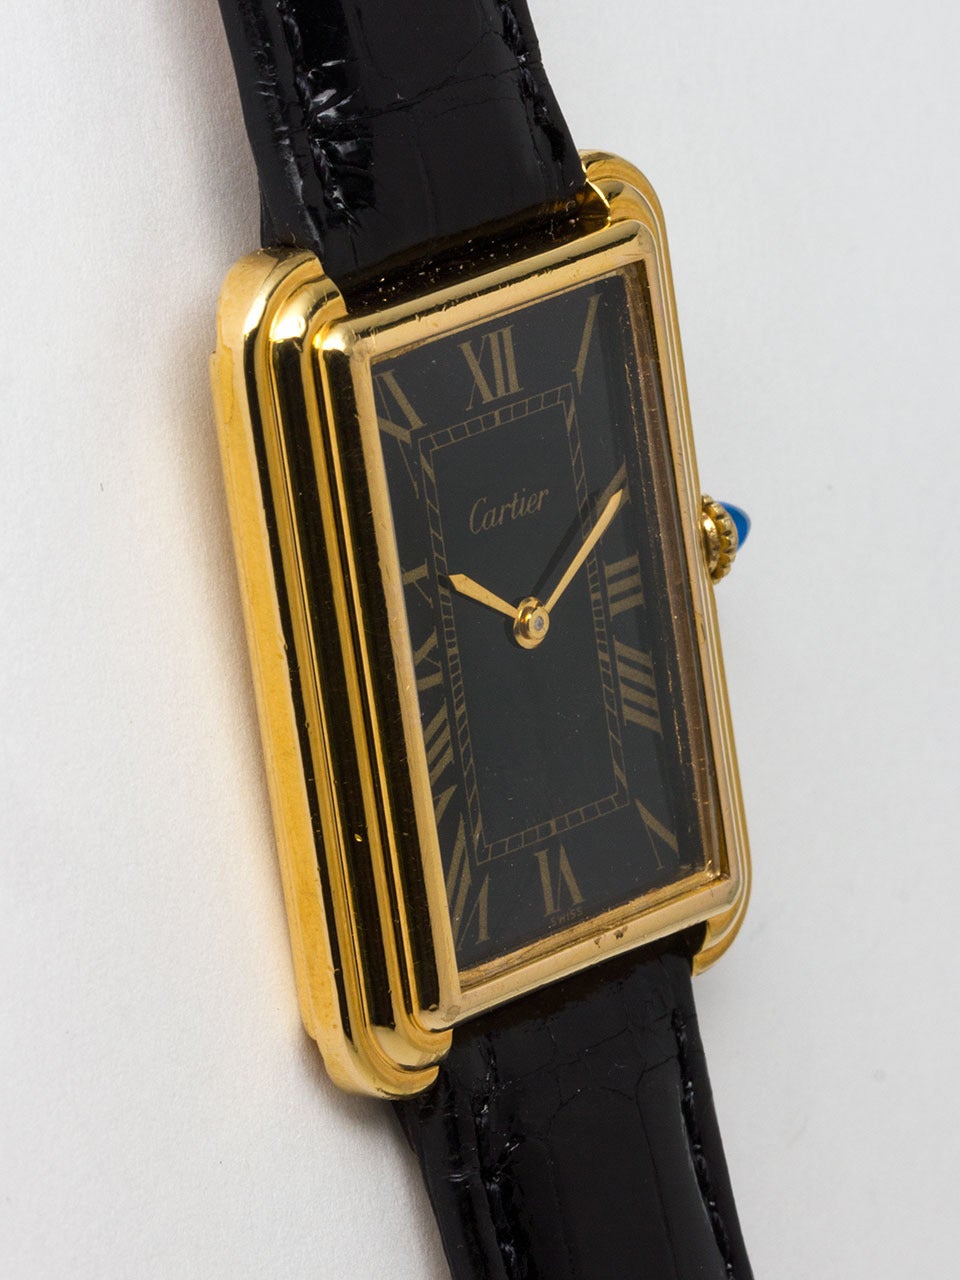 Cartier Vermeil Stepped Case Tank Wristwatch ref 12 serial # 00375 circa 1970's Case measuring 26 X 37mm with screwed case back and cabochon sapphire crown. Original black gloss dial with gold printed Roman figures and gilt hands. 17 jewel manual